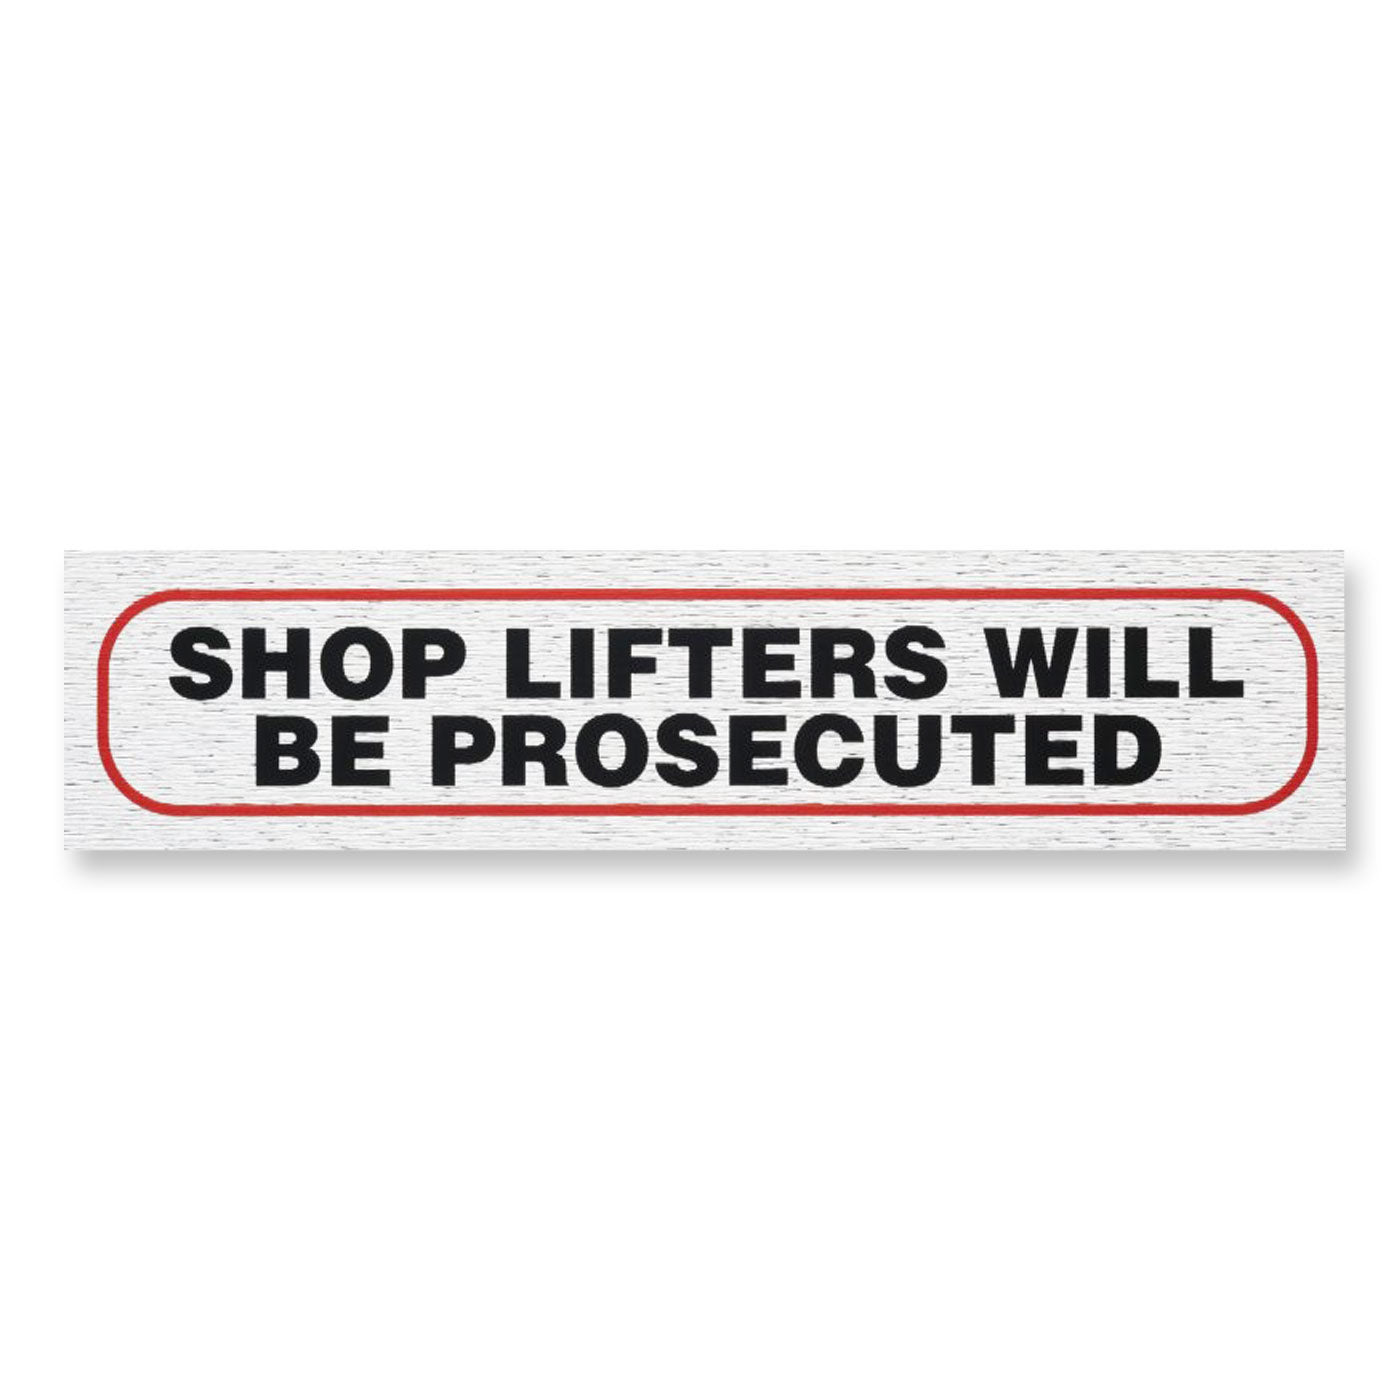 Information Sign "SHOP LIFTERS WILL BE PROSECUTED" 17 x 4 cm [Self-Adhesive]